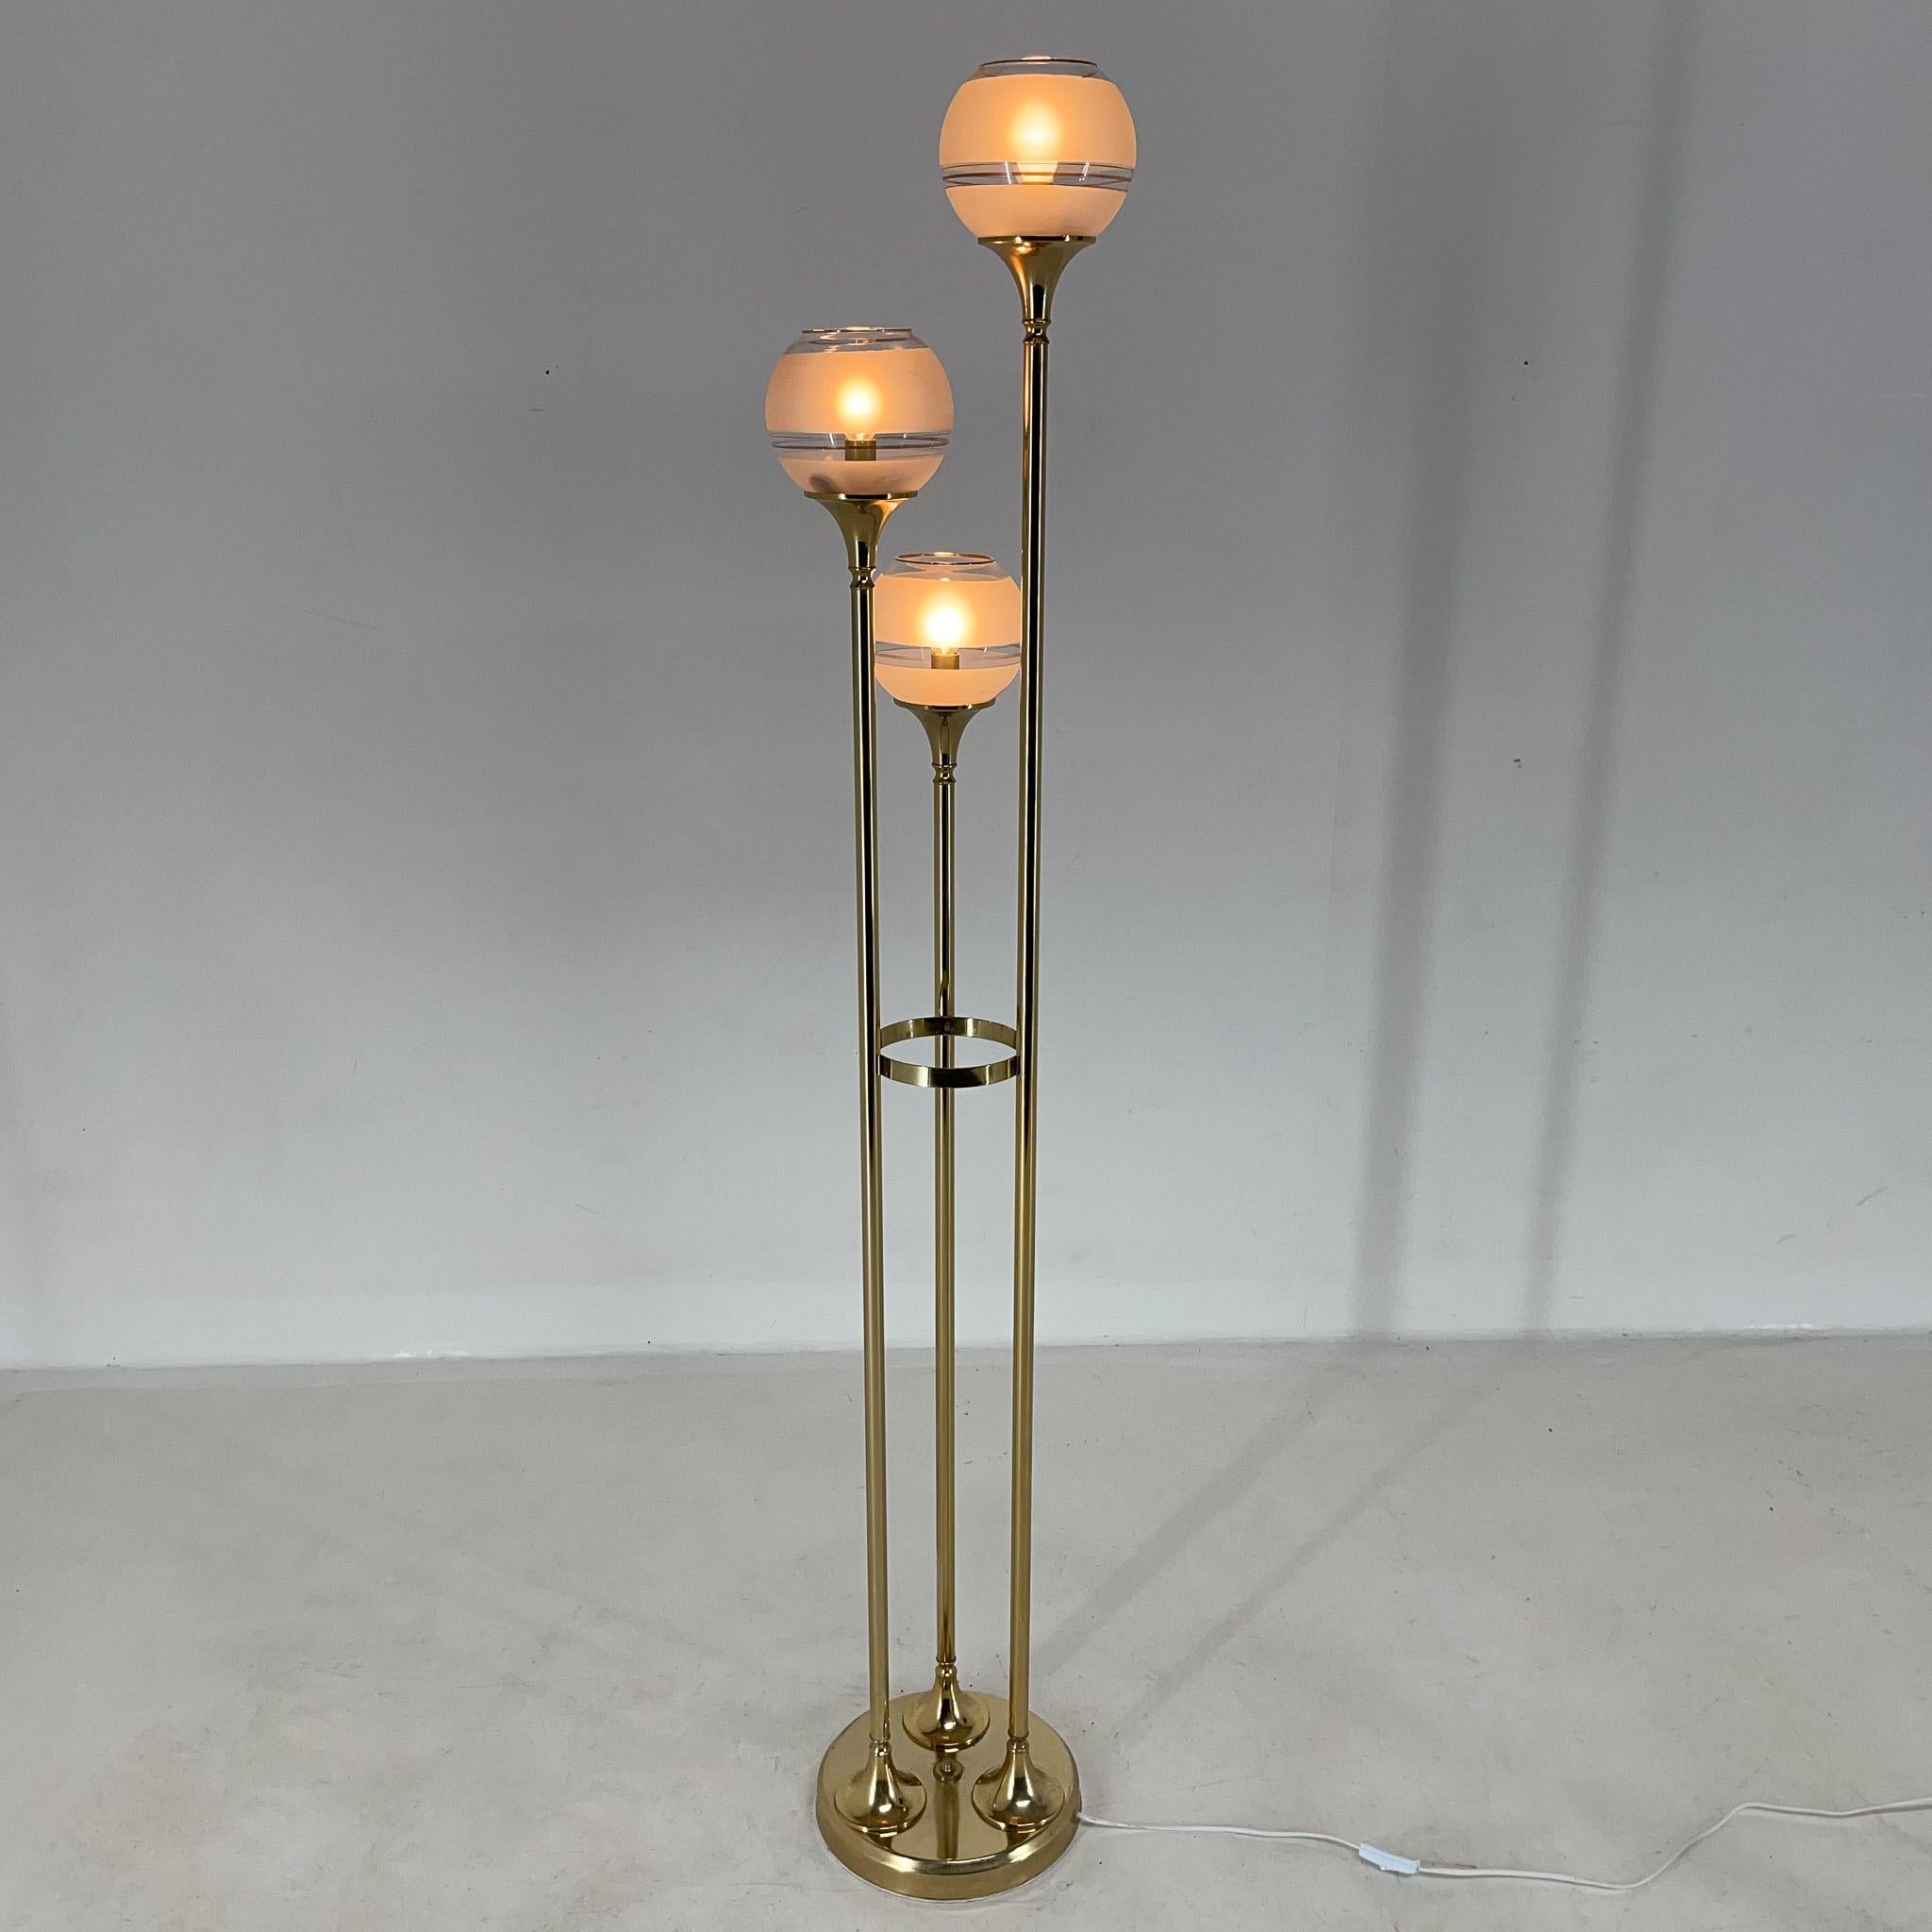 Vintage floor lamp made of light metal in golden colour with three glass bowl lamp shades. In very good original condition (see photo), made in Italy in the 1970's.